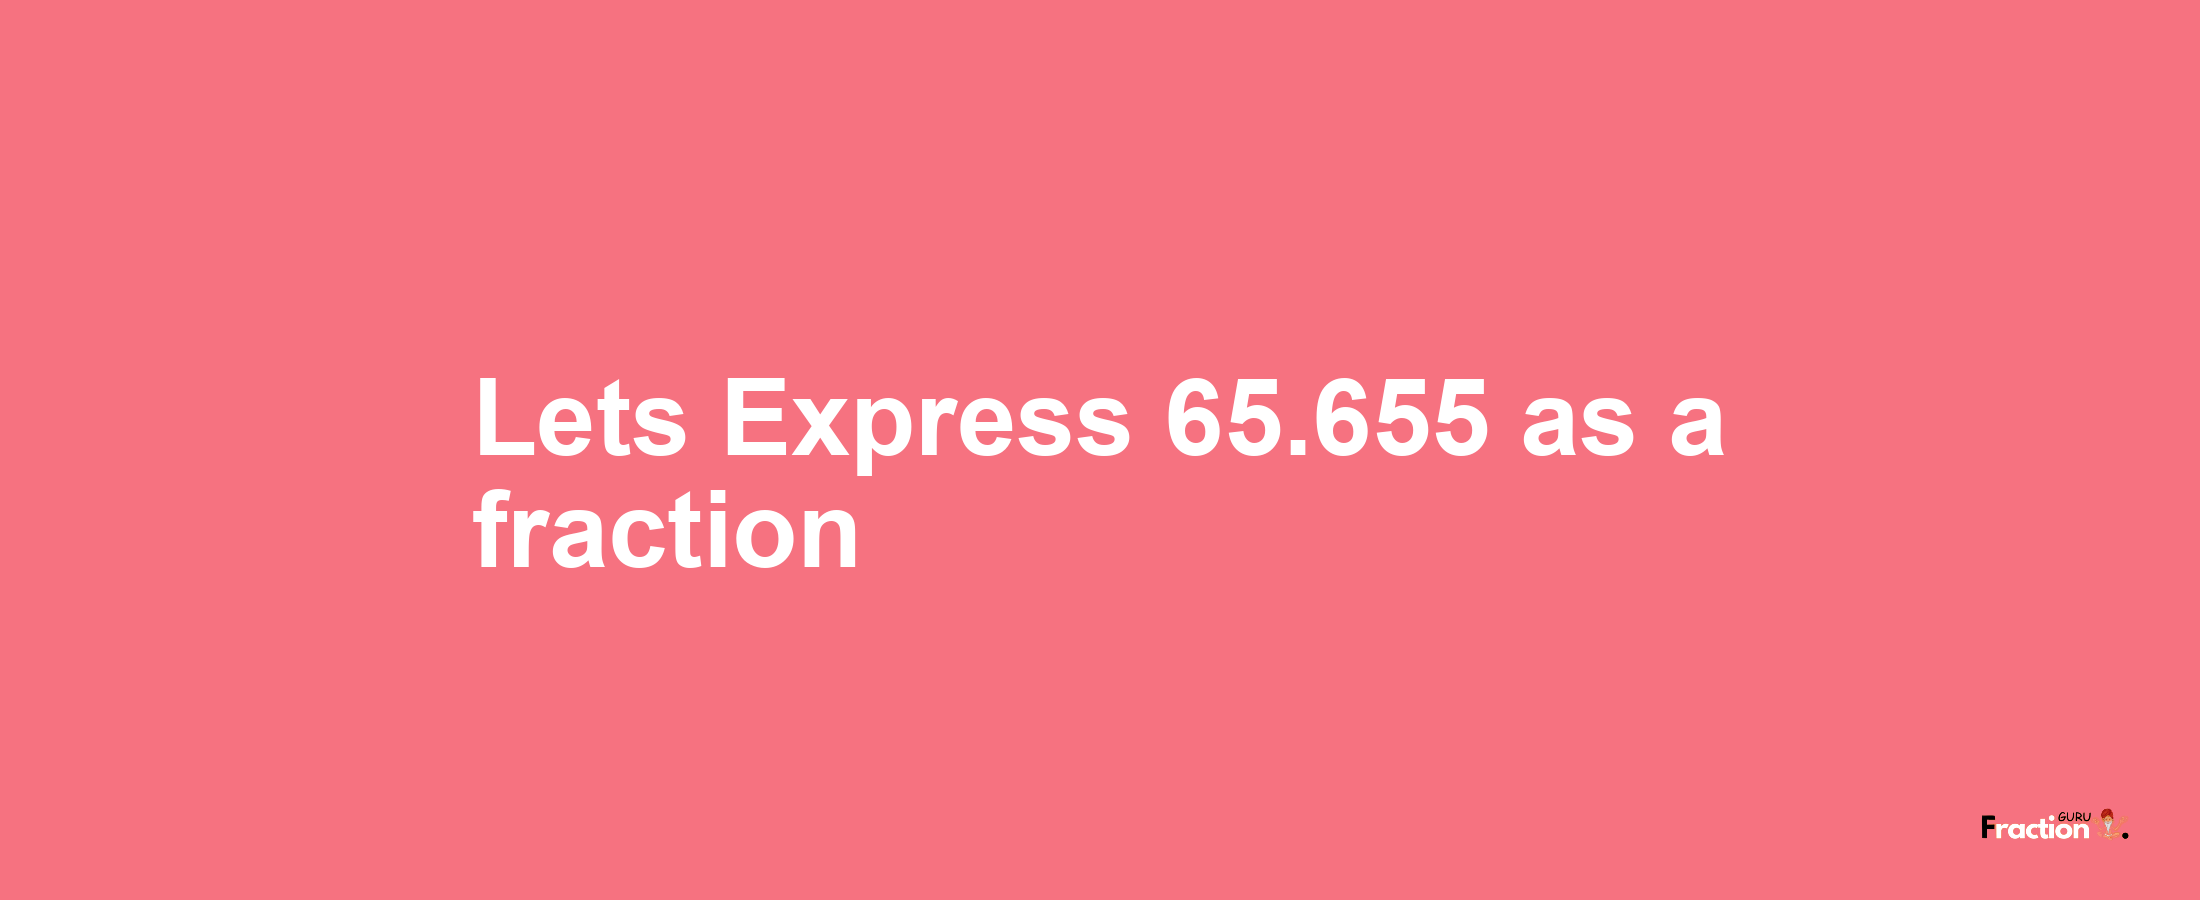 Lets Express 65.655 as afraction